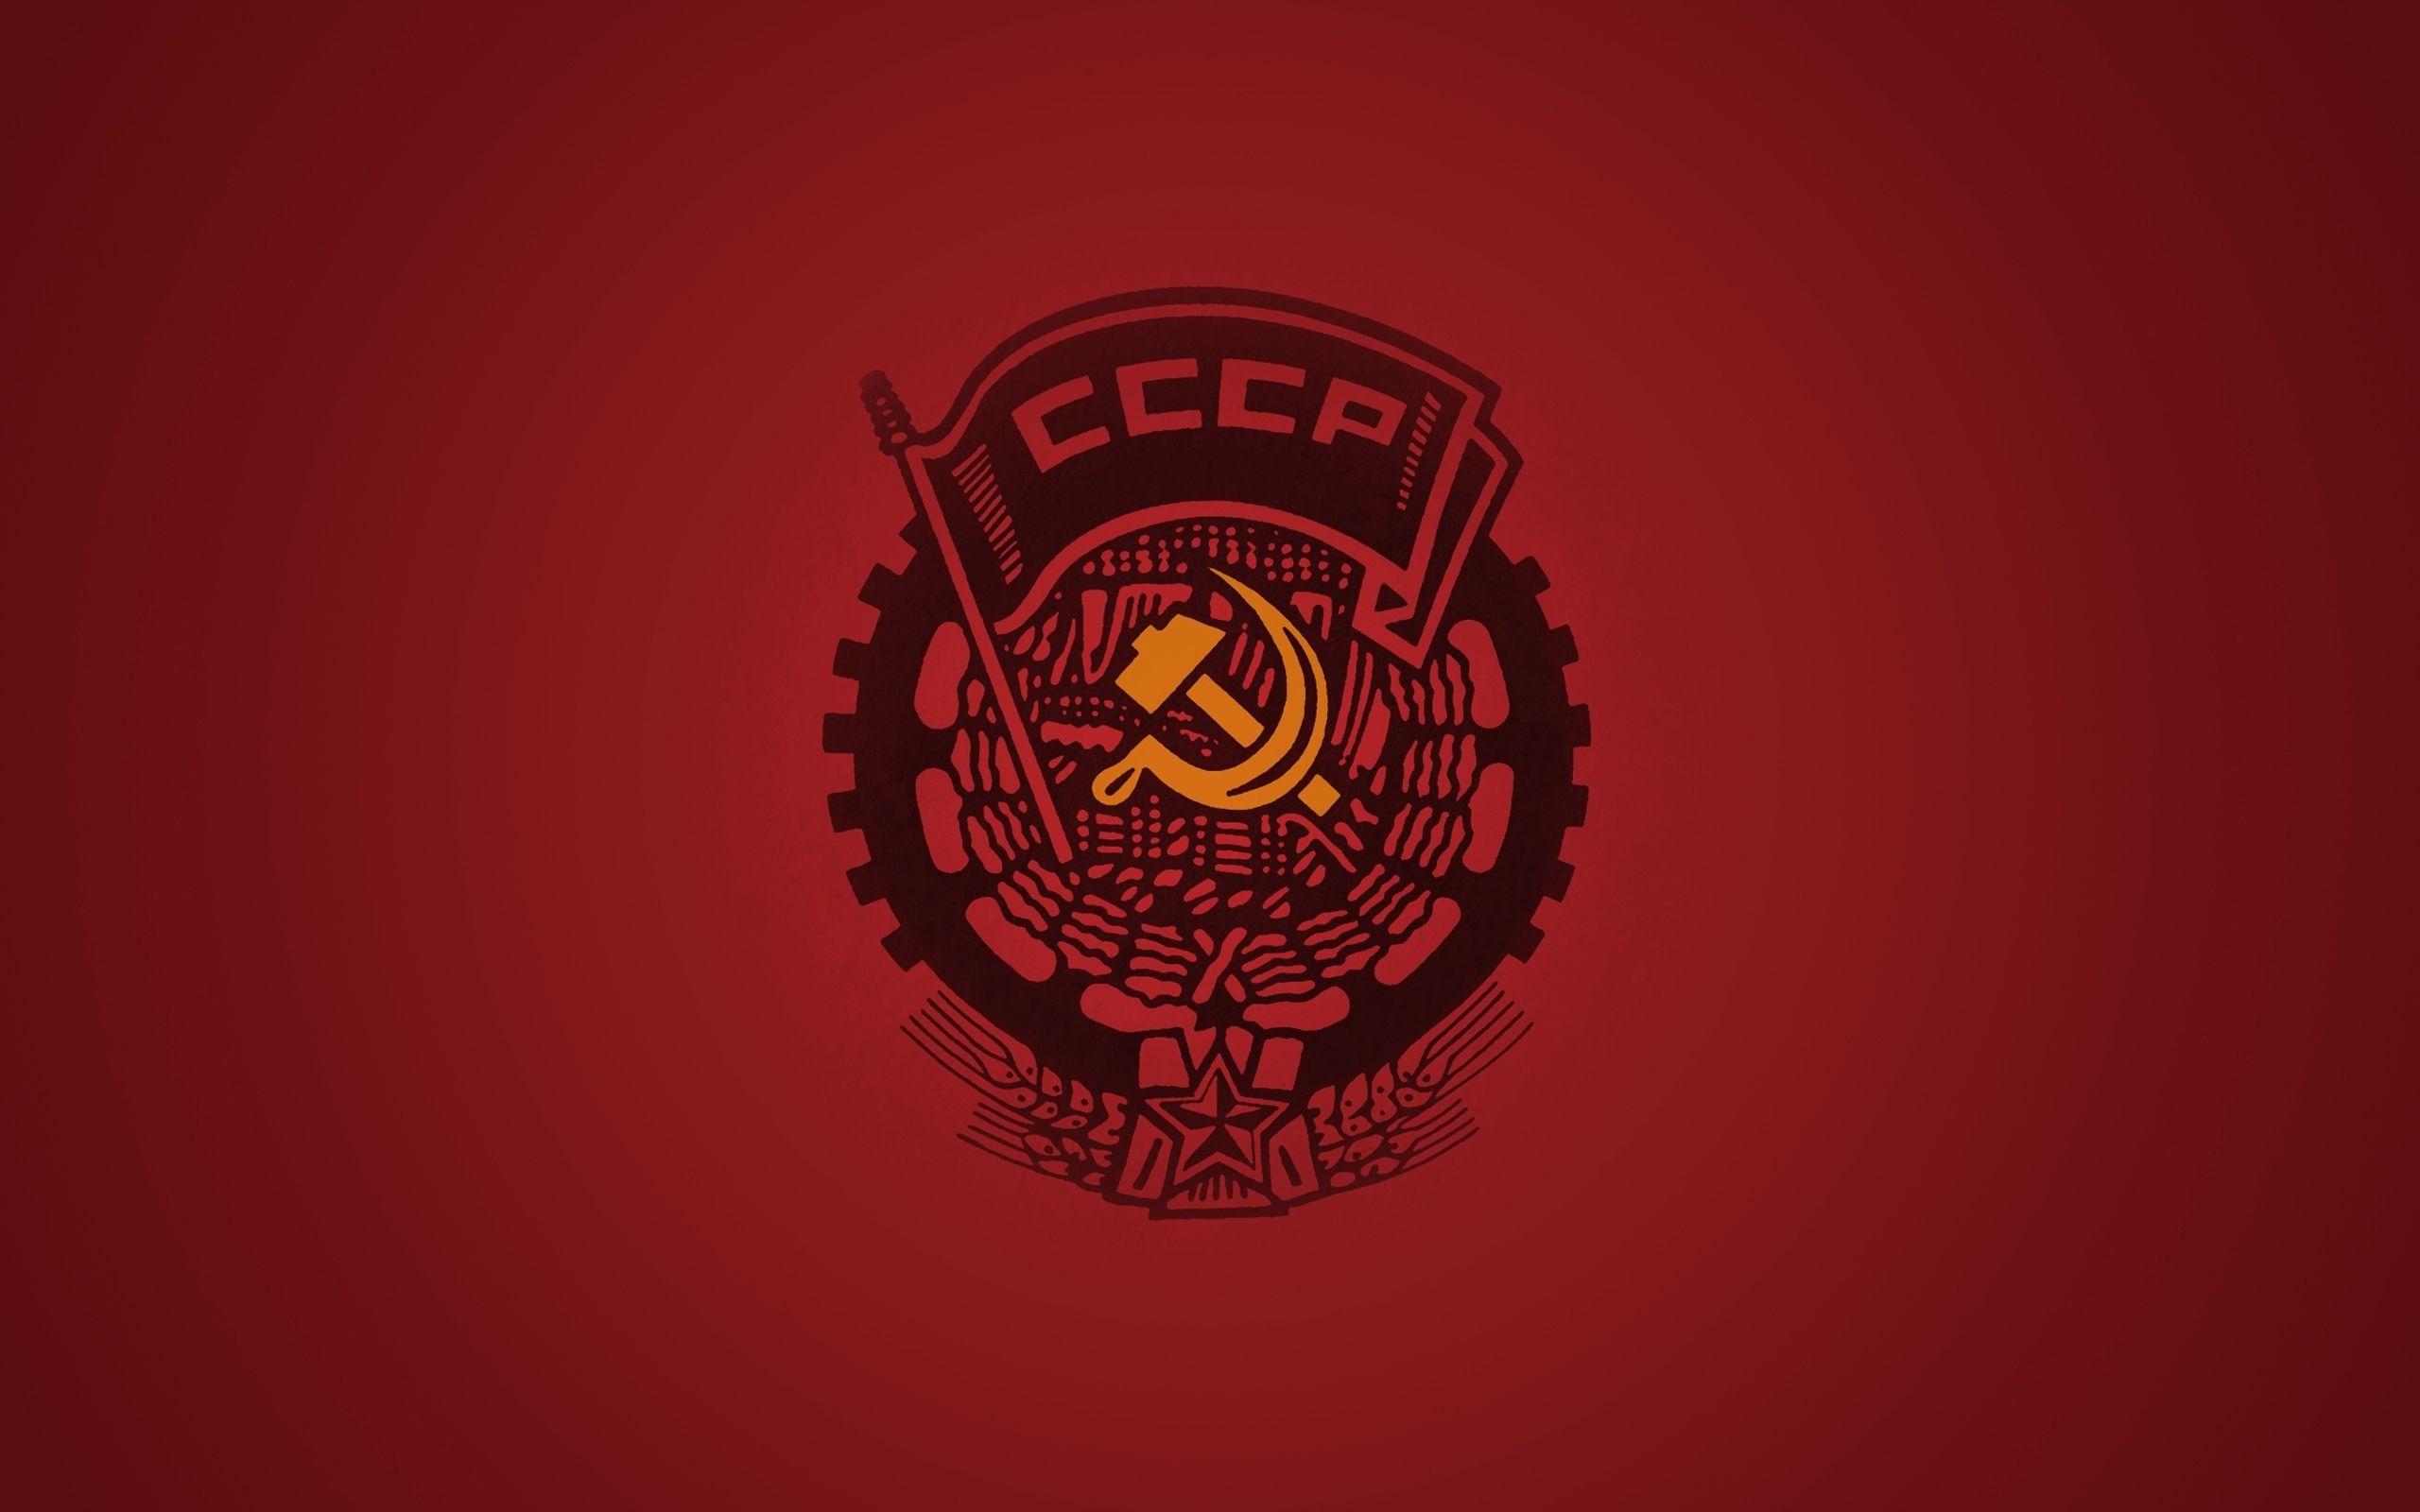 Communist wallpaper feel free to downvote or ignore